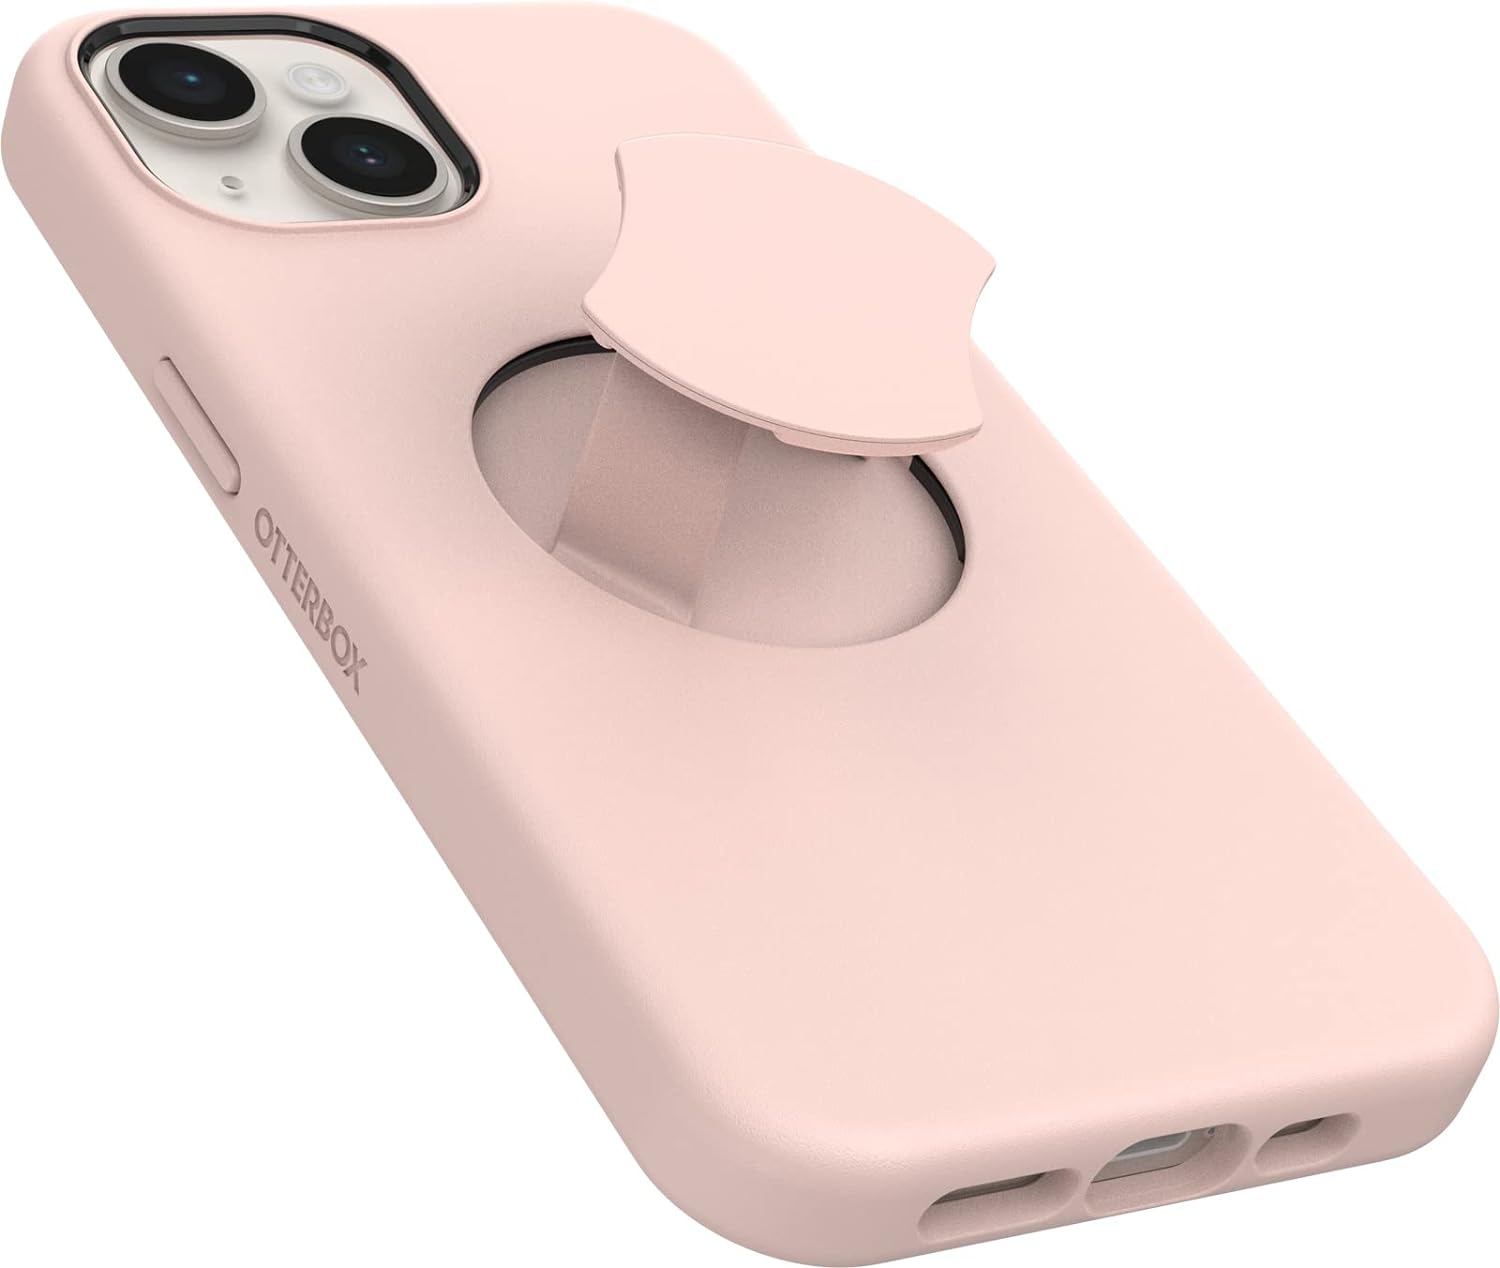 OtterGrip SYMMETRY SERIES iPhone 14 / iPhone 13 Case - Made Me Blush (Pink) (New)